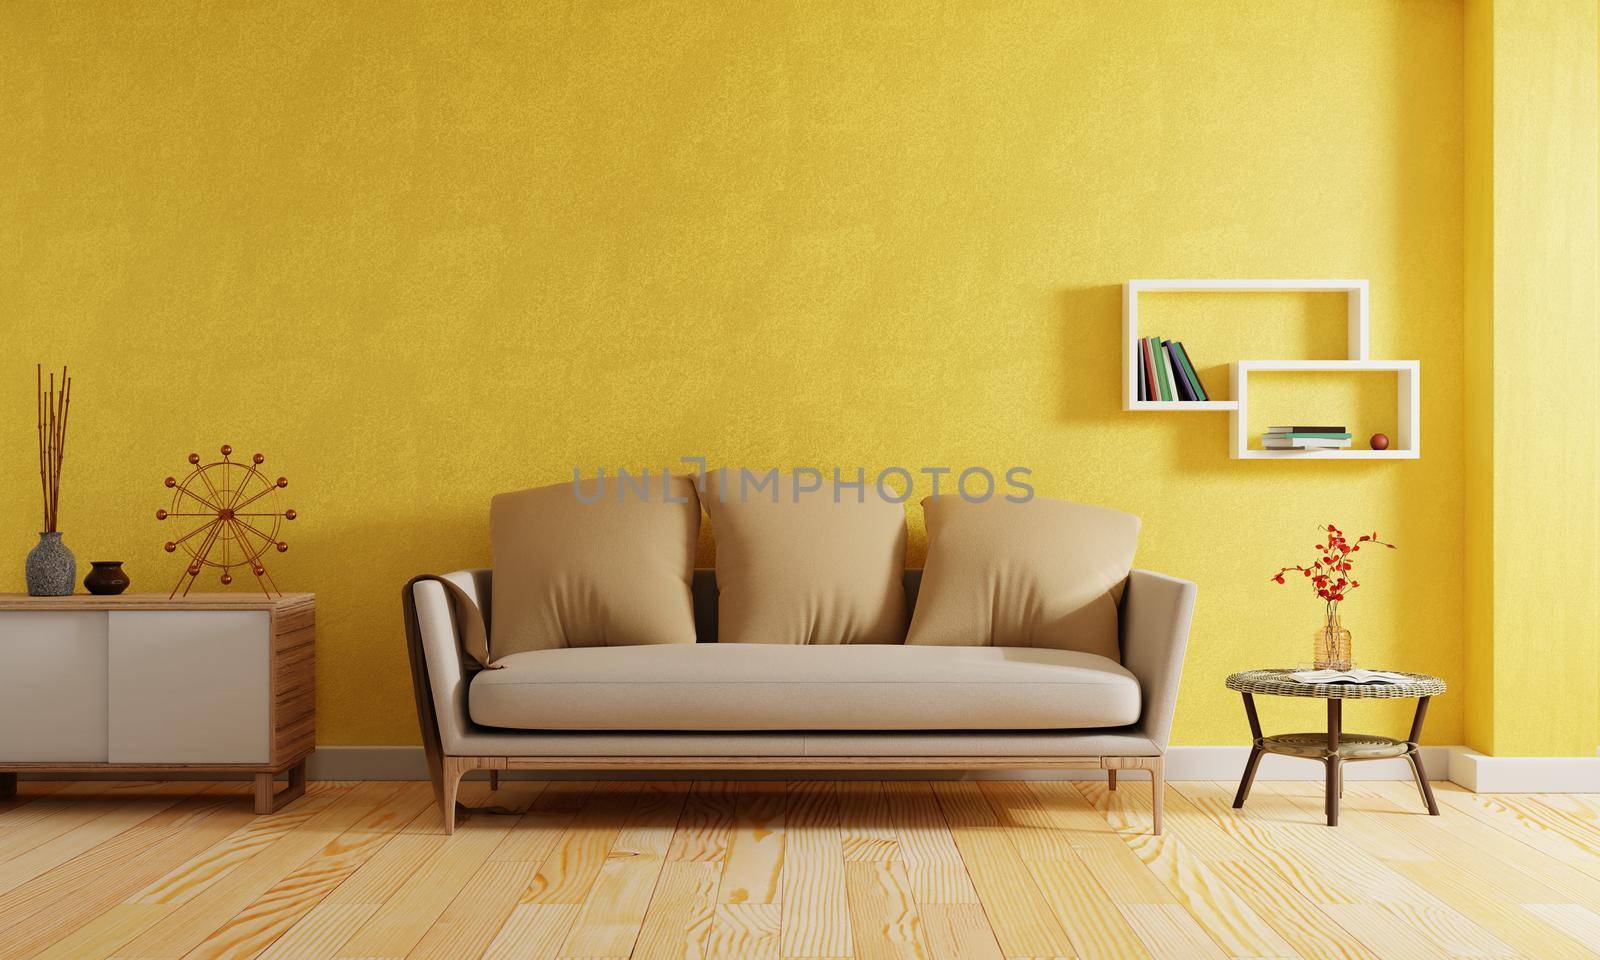 Modern living room in yellow tone color style background. Interior and architecture concept. 3D illustration rendering